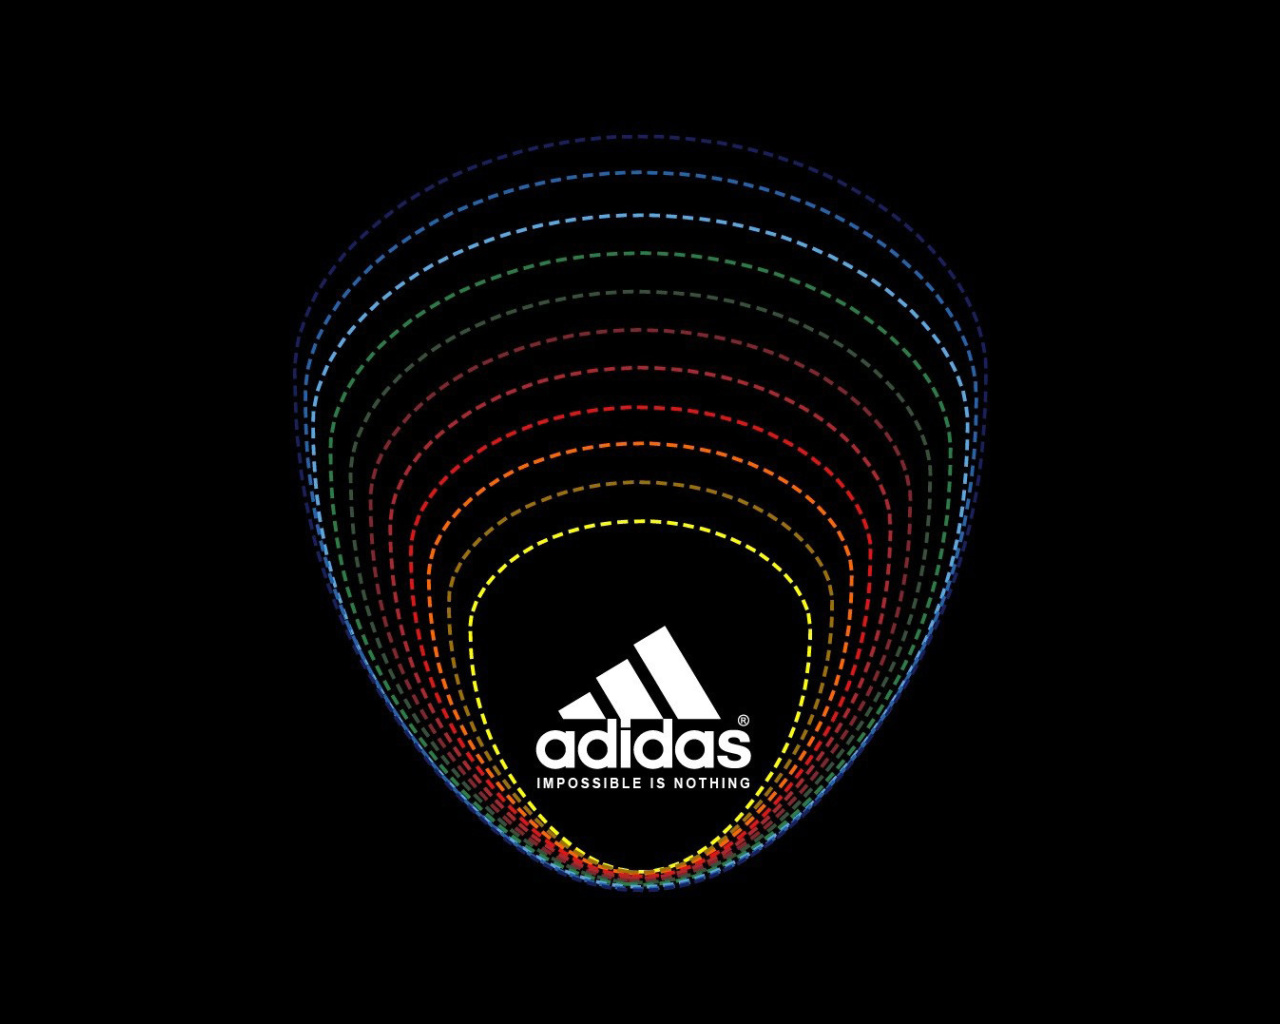 Adidas Tagline, Impossible is Nothing wallpaper 1280x1024